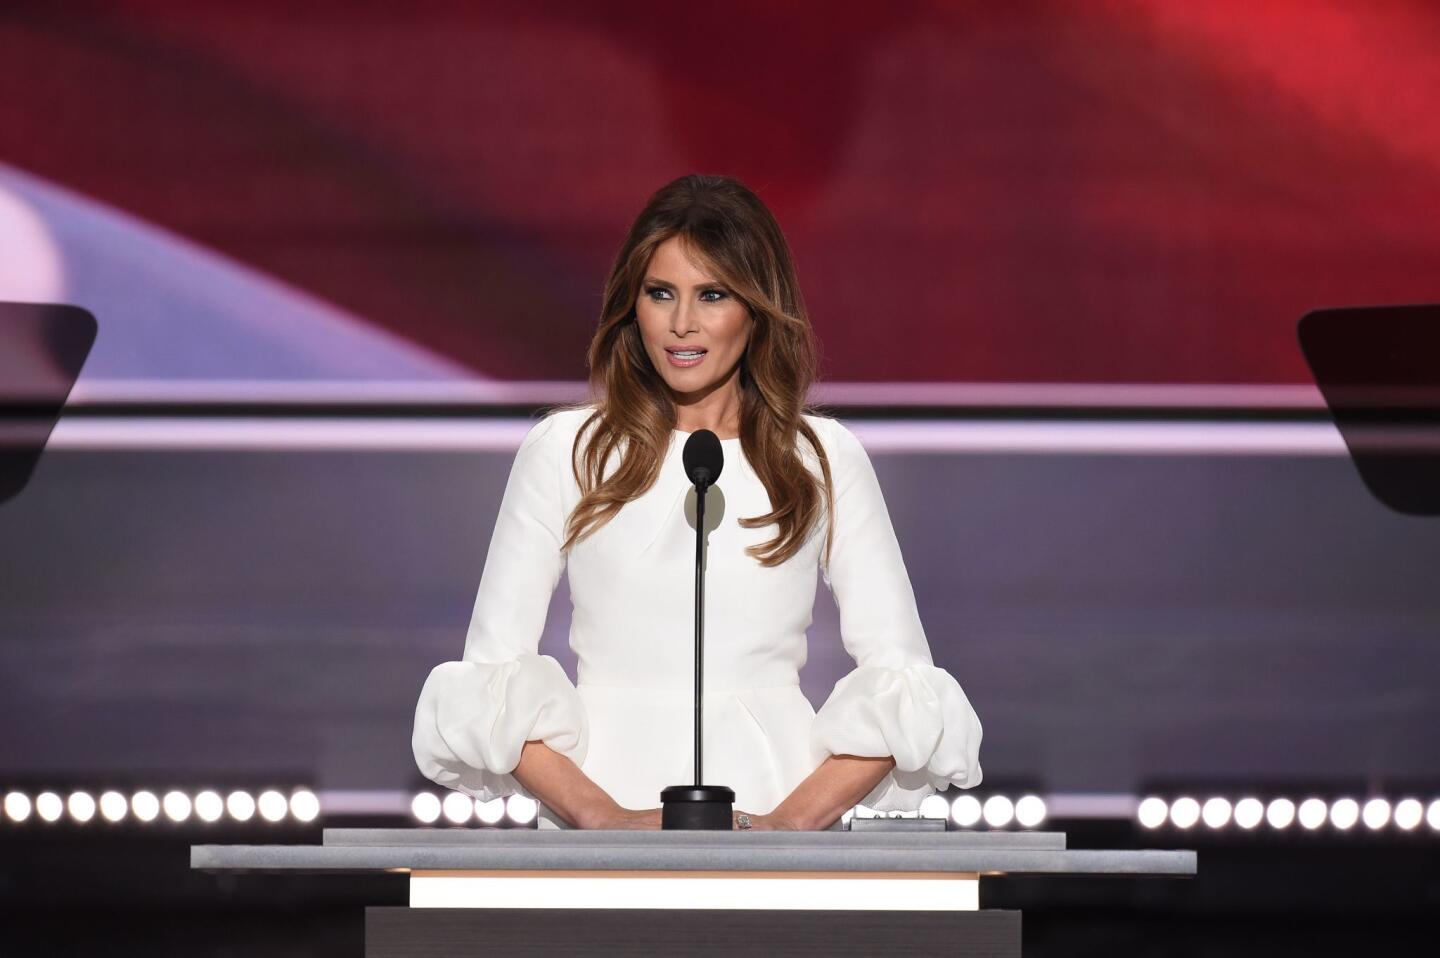 Melania speaks at the Republican National Convention